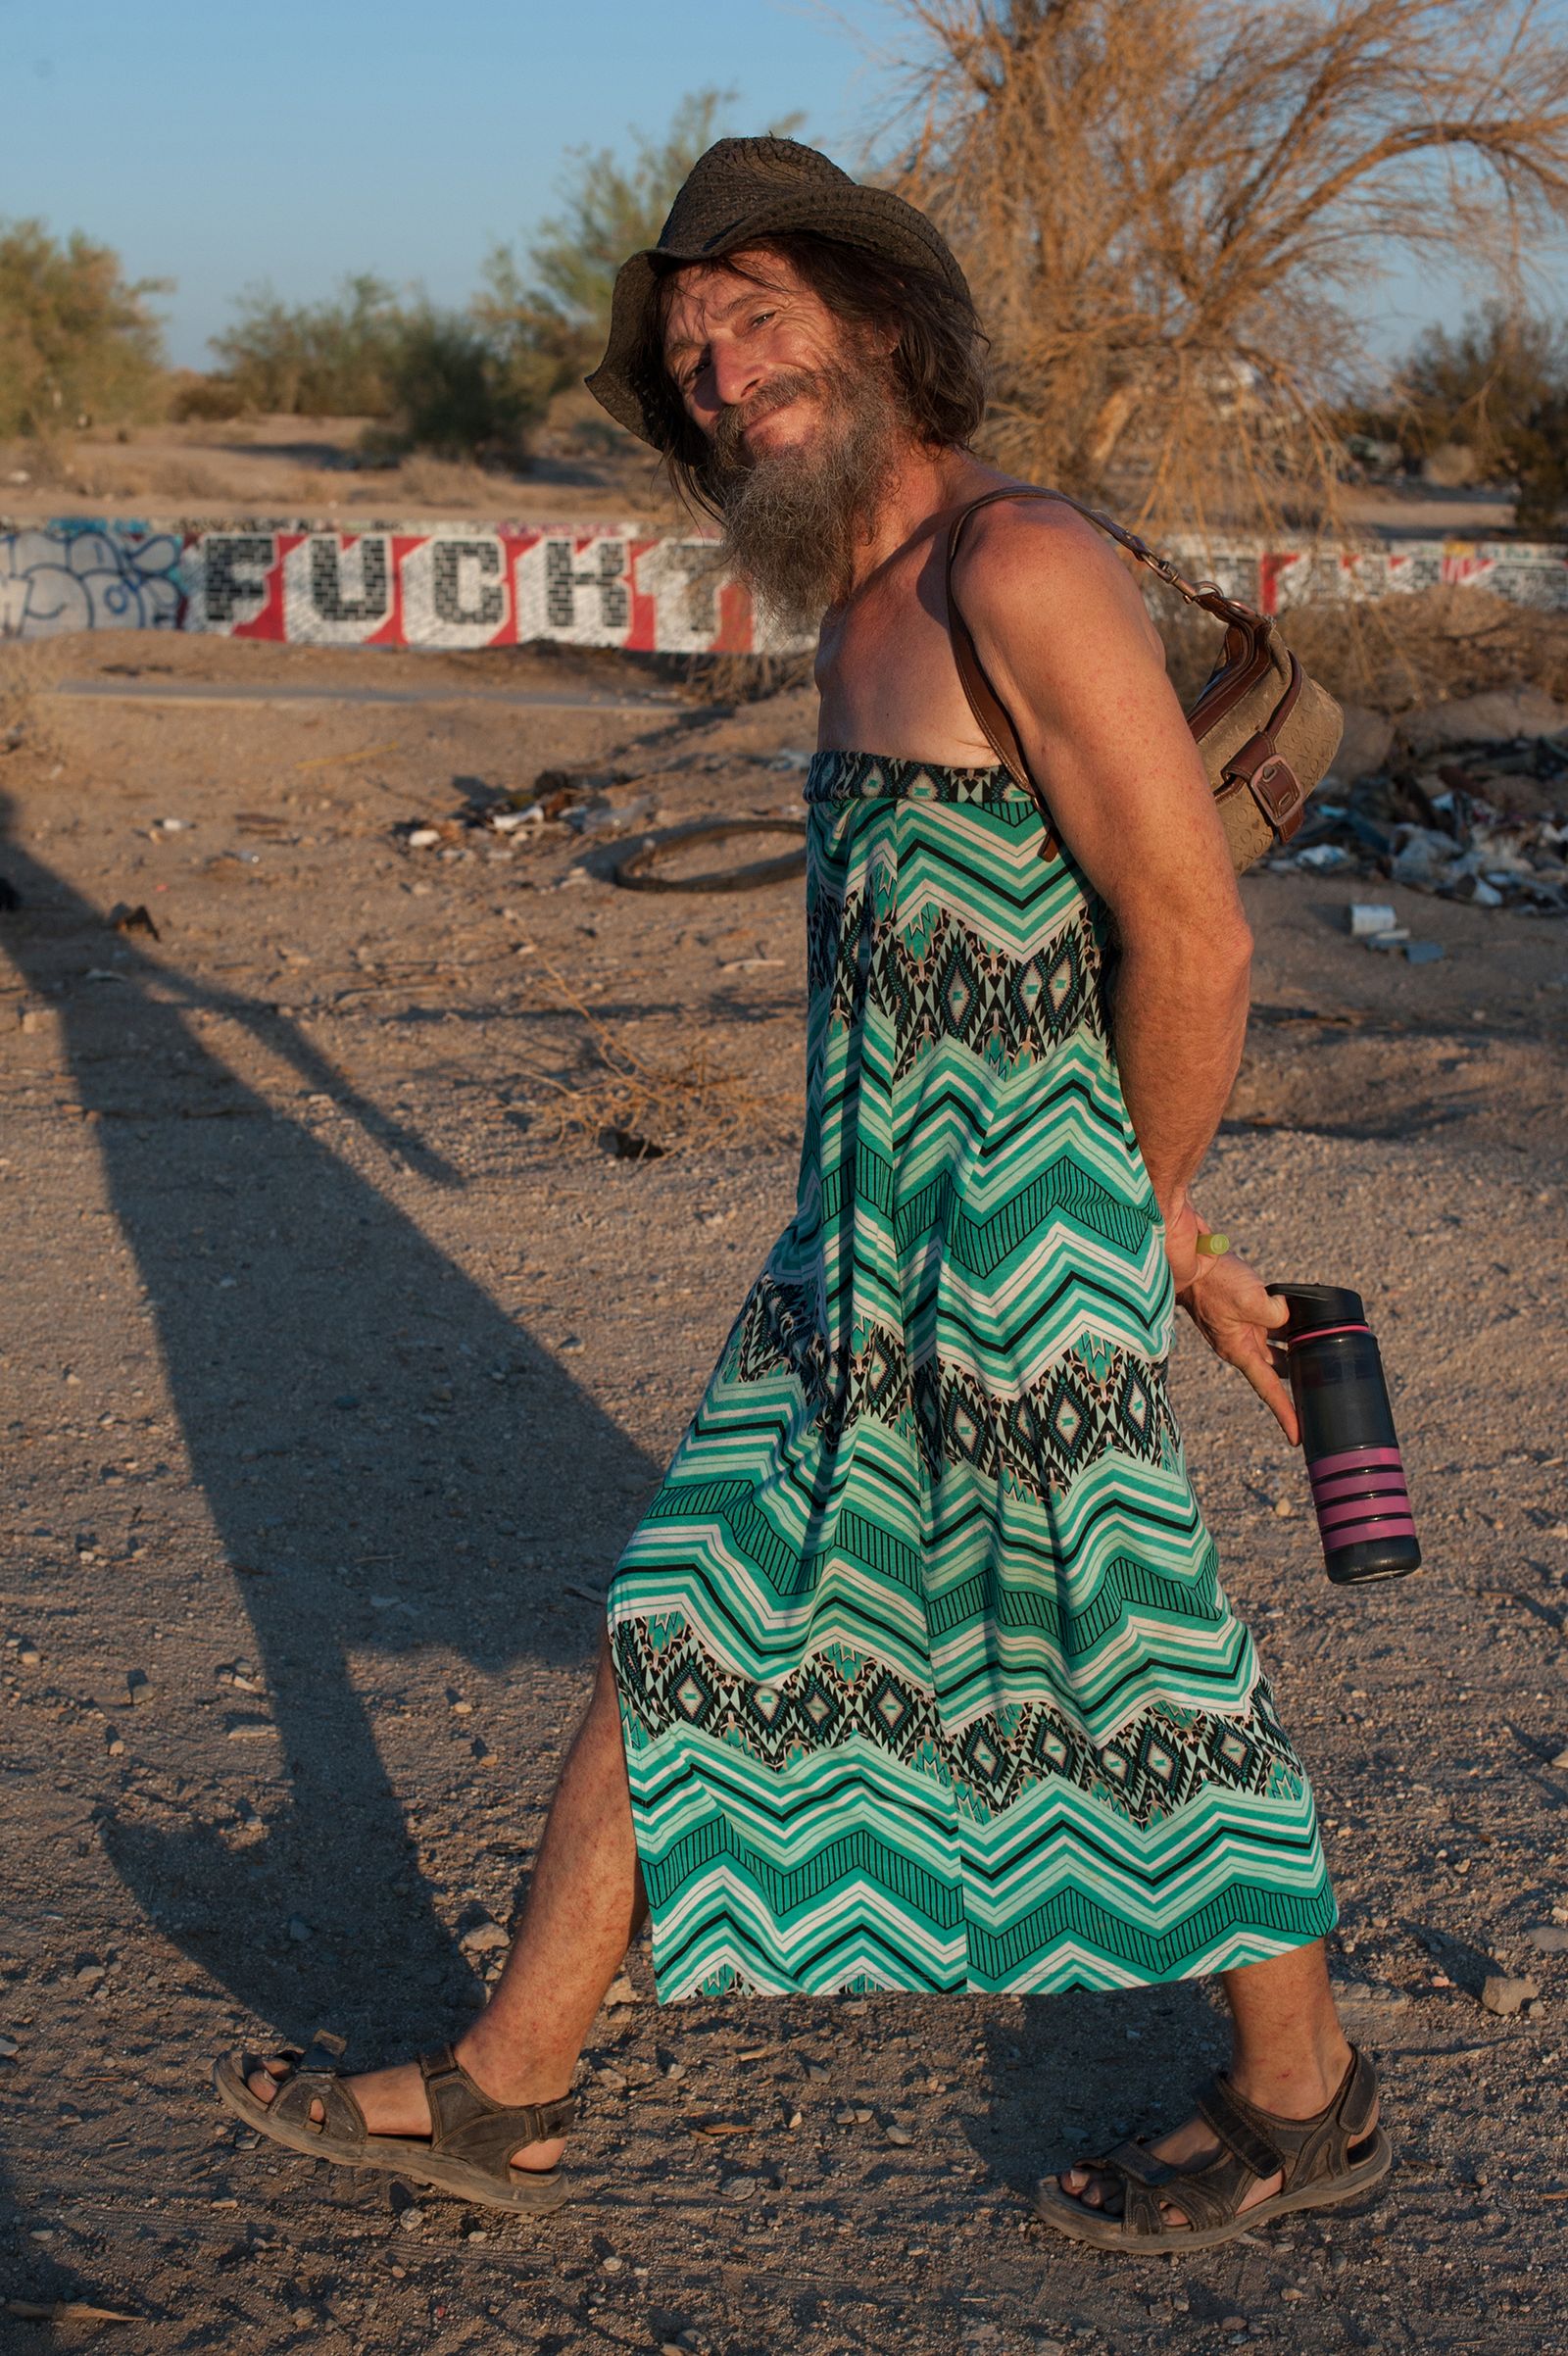 © Jason Houge - Doc is a former computer programmer and long-time resident. Slab City, USA 2018